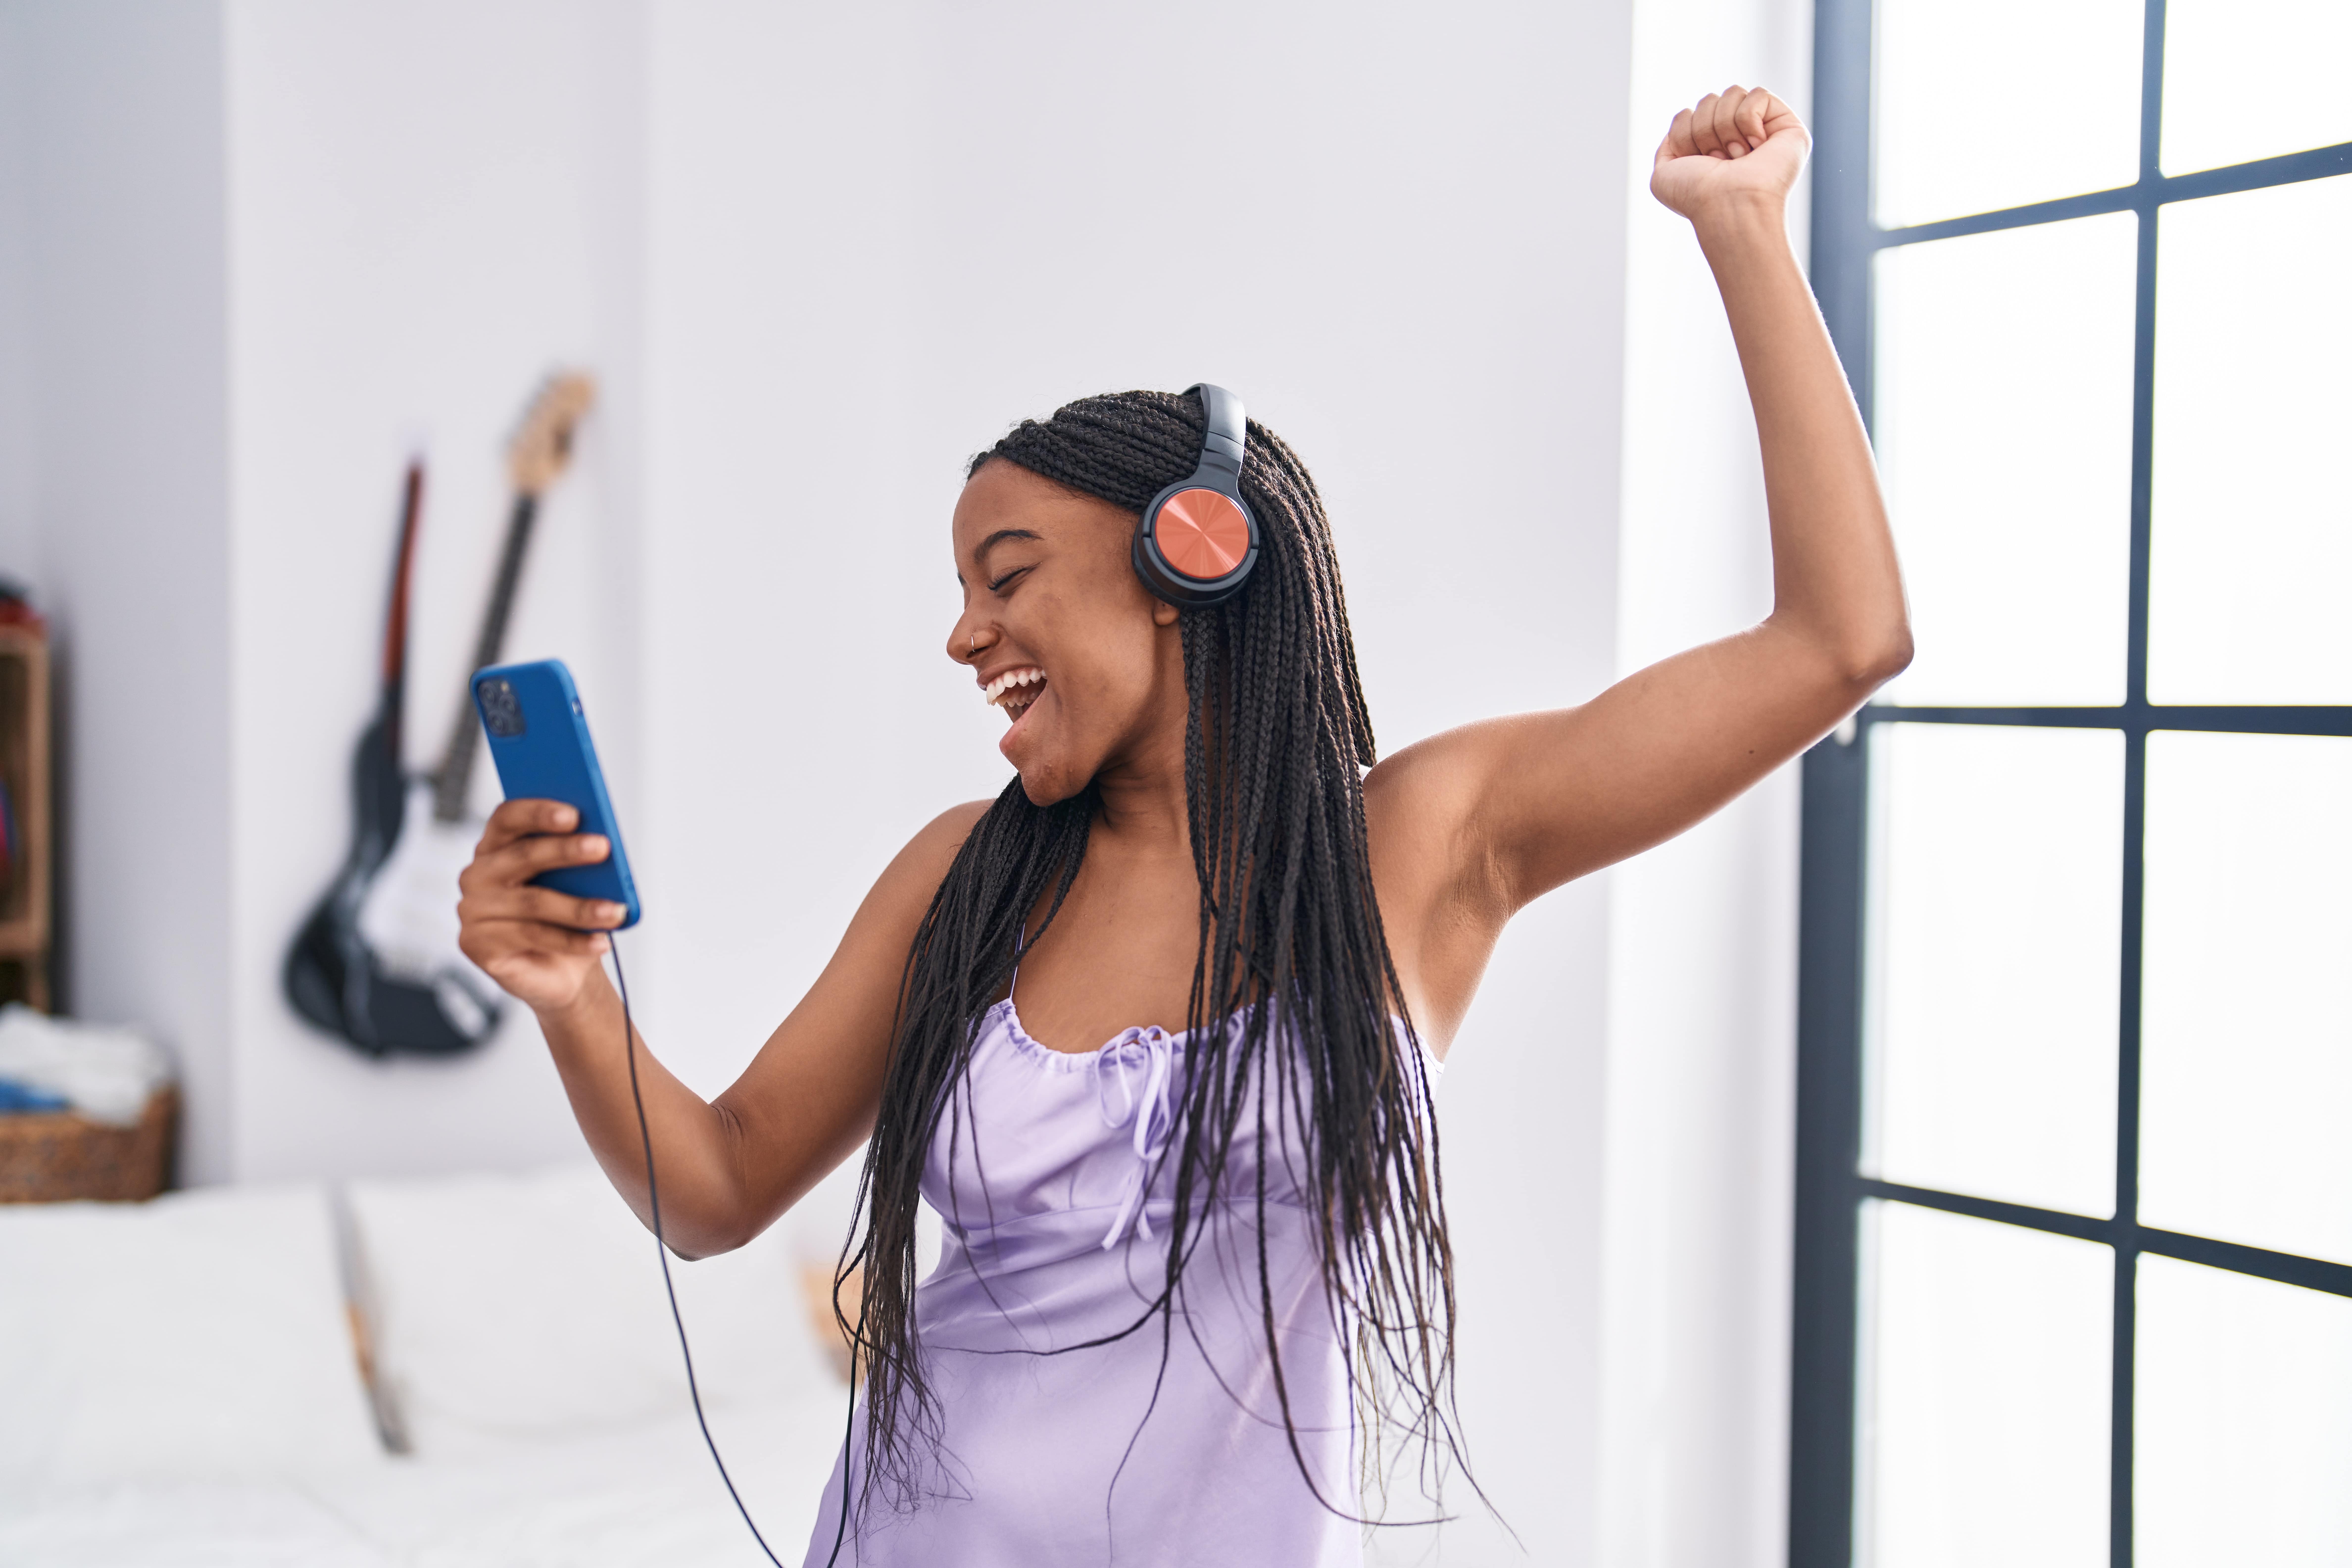 Woman dancing and smiling with headphones on listening to tunes from her mobile. An electric guitar hangs on the wall in the background.